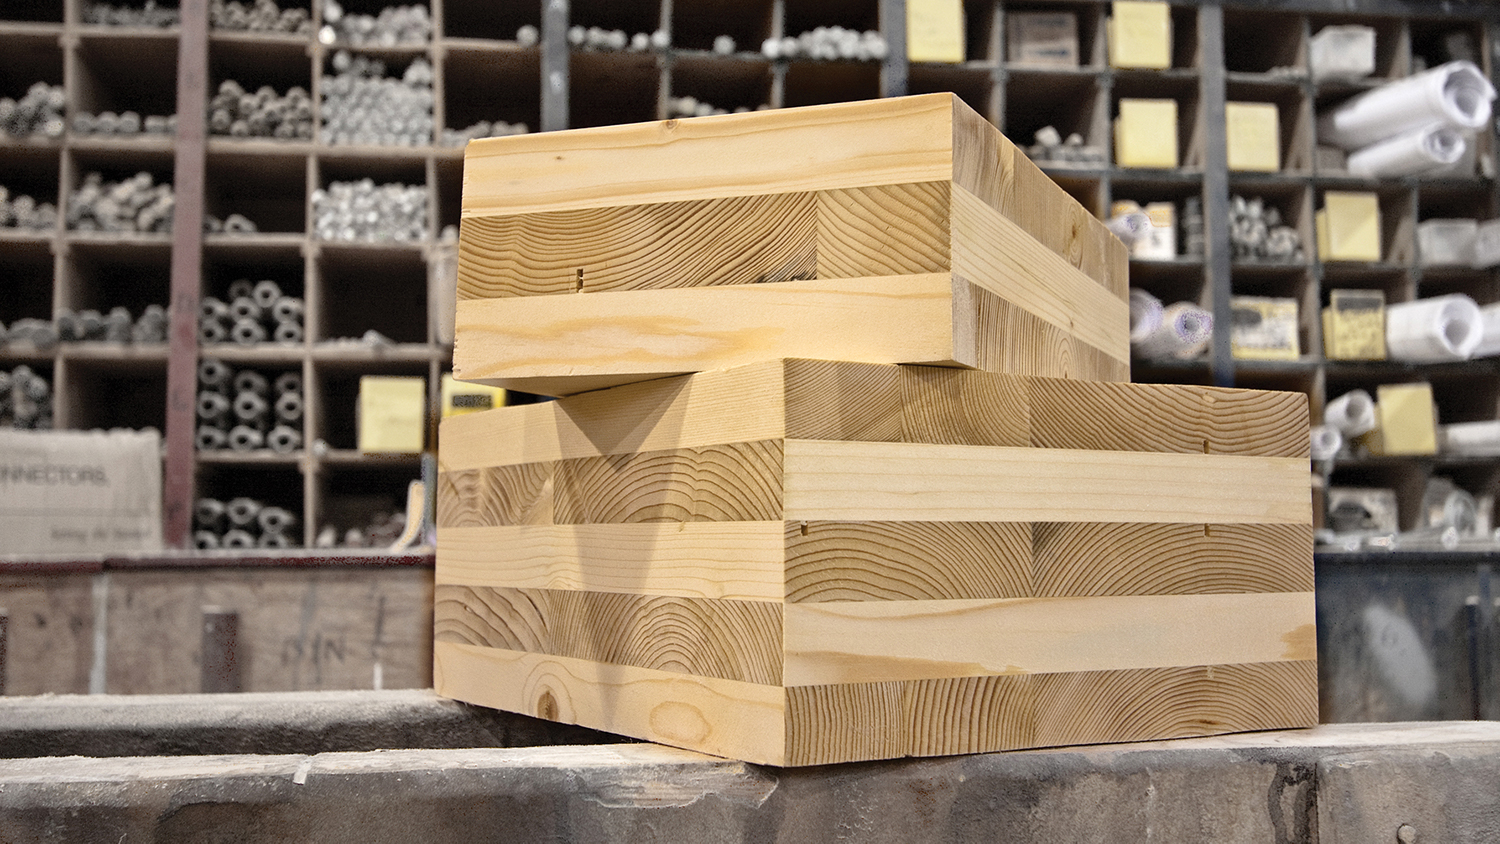 Cross laminated timber blocks. Photo by Oregon Department of Forestry, Flickr Creative Commons.